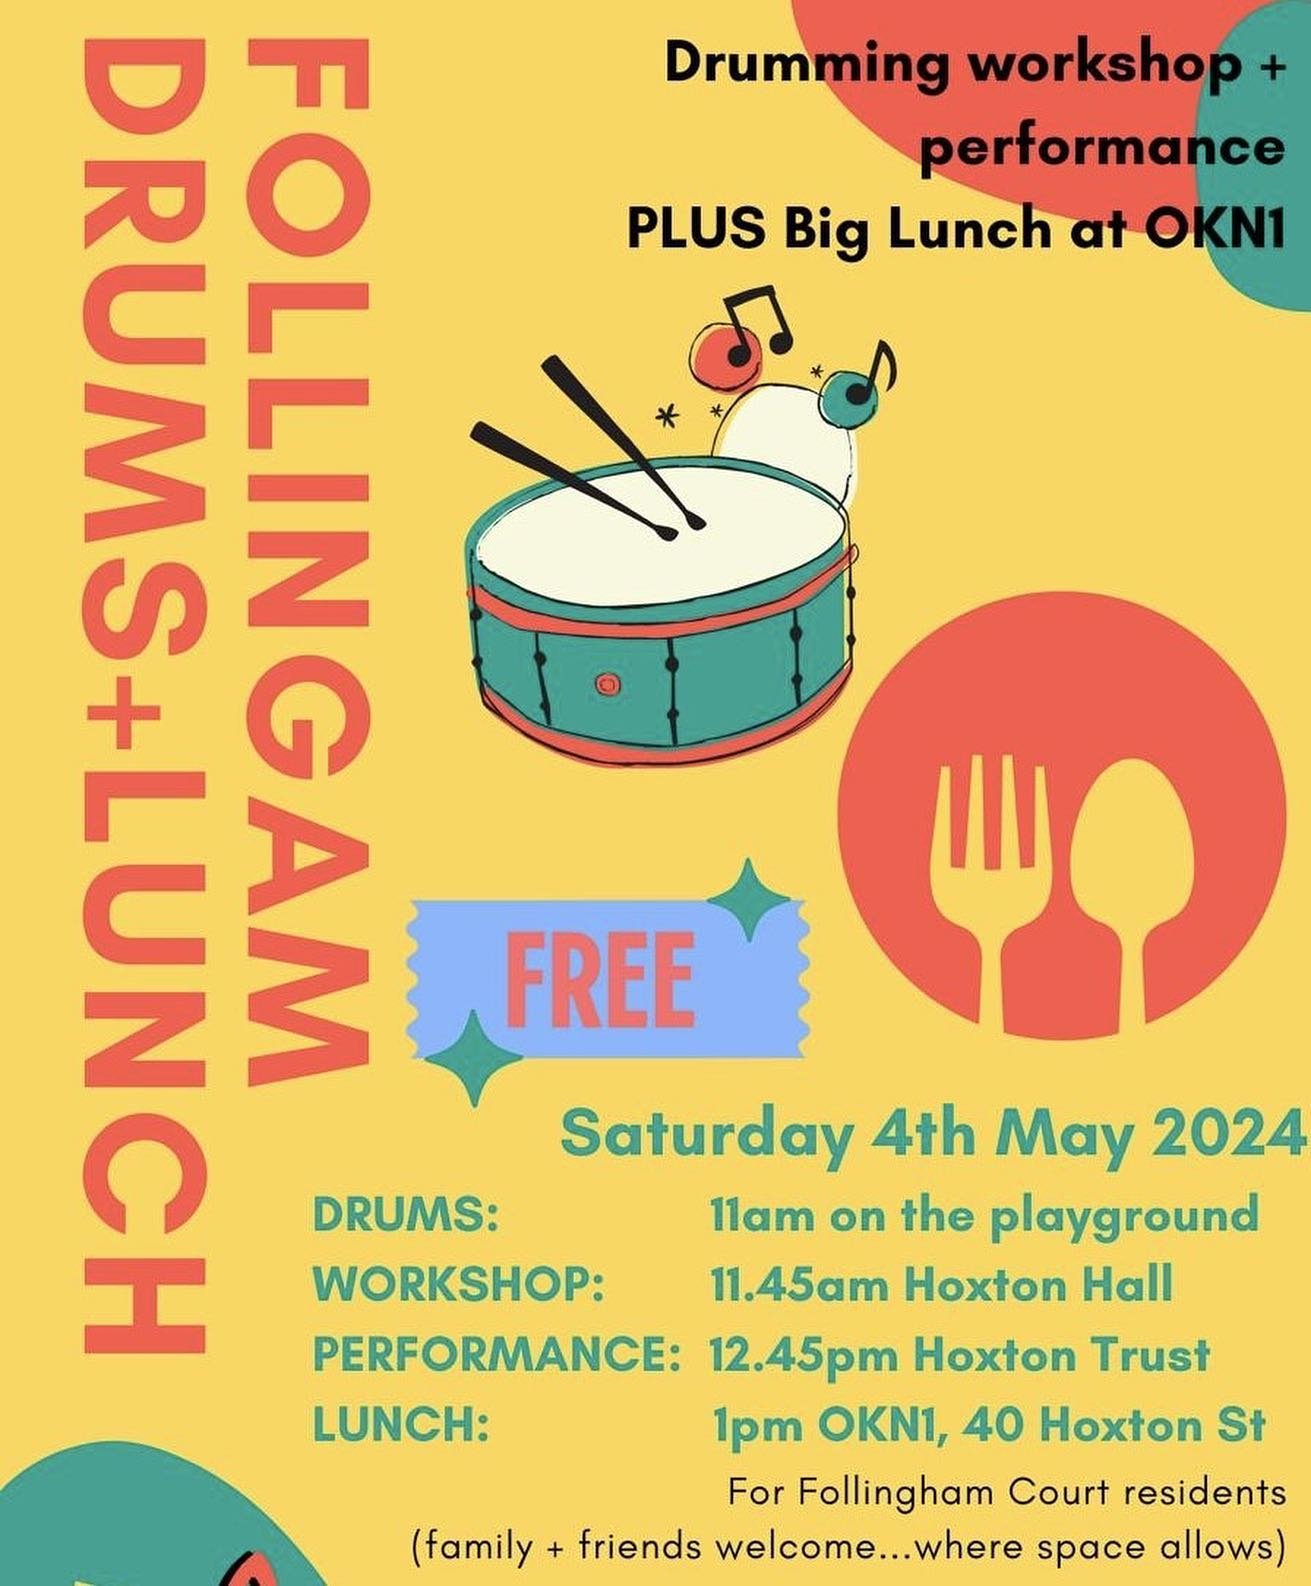 Are you a Follingham Court resident?

Come along to OKN1 for a FREE lunch after various fun activities in your local area.

#hackney #hoxton #okn1 #event #lunch